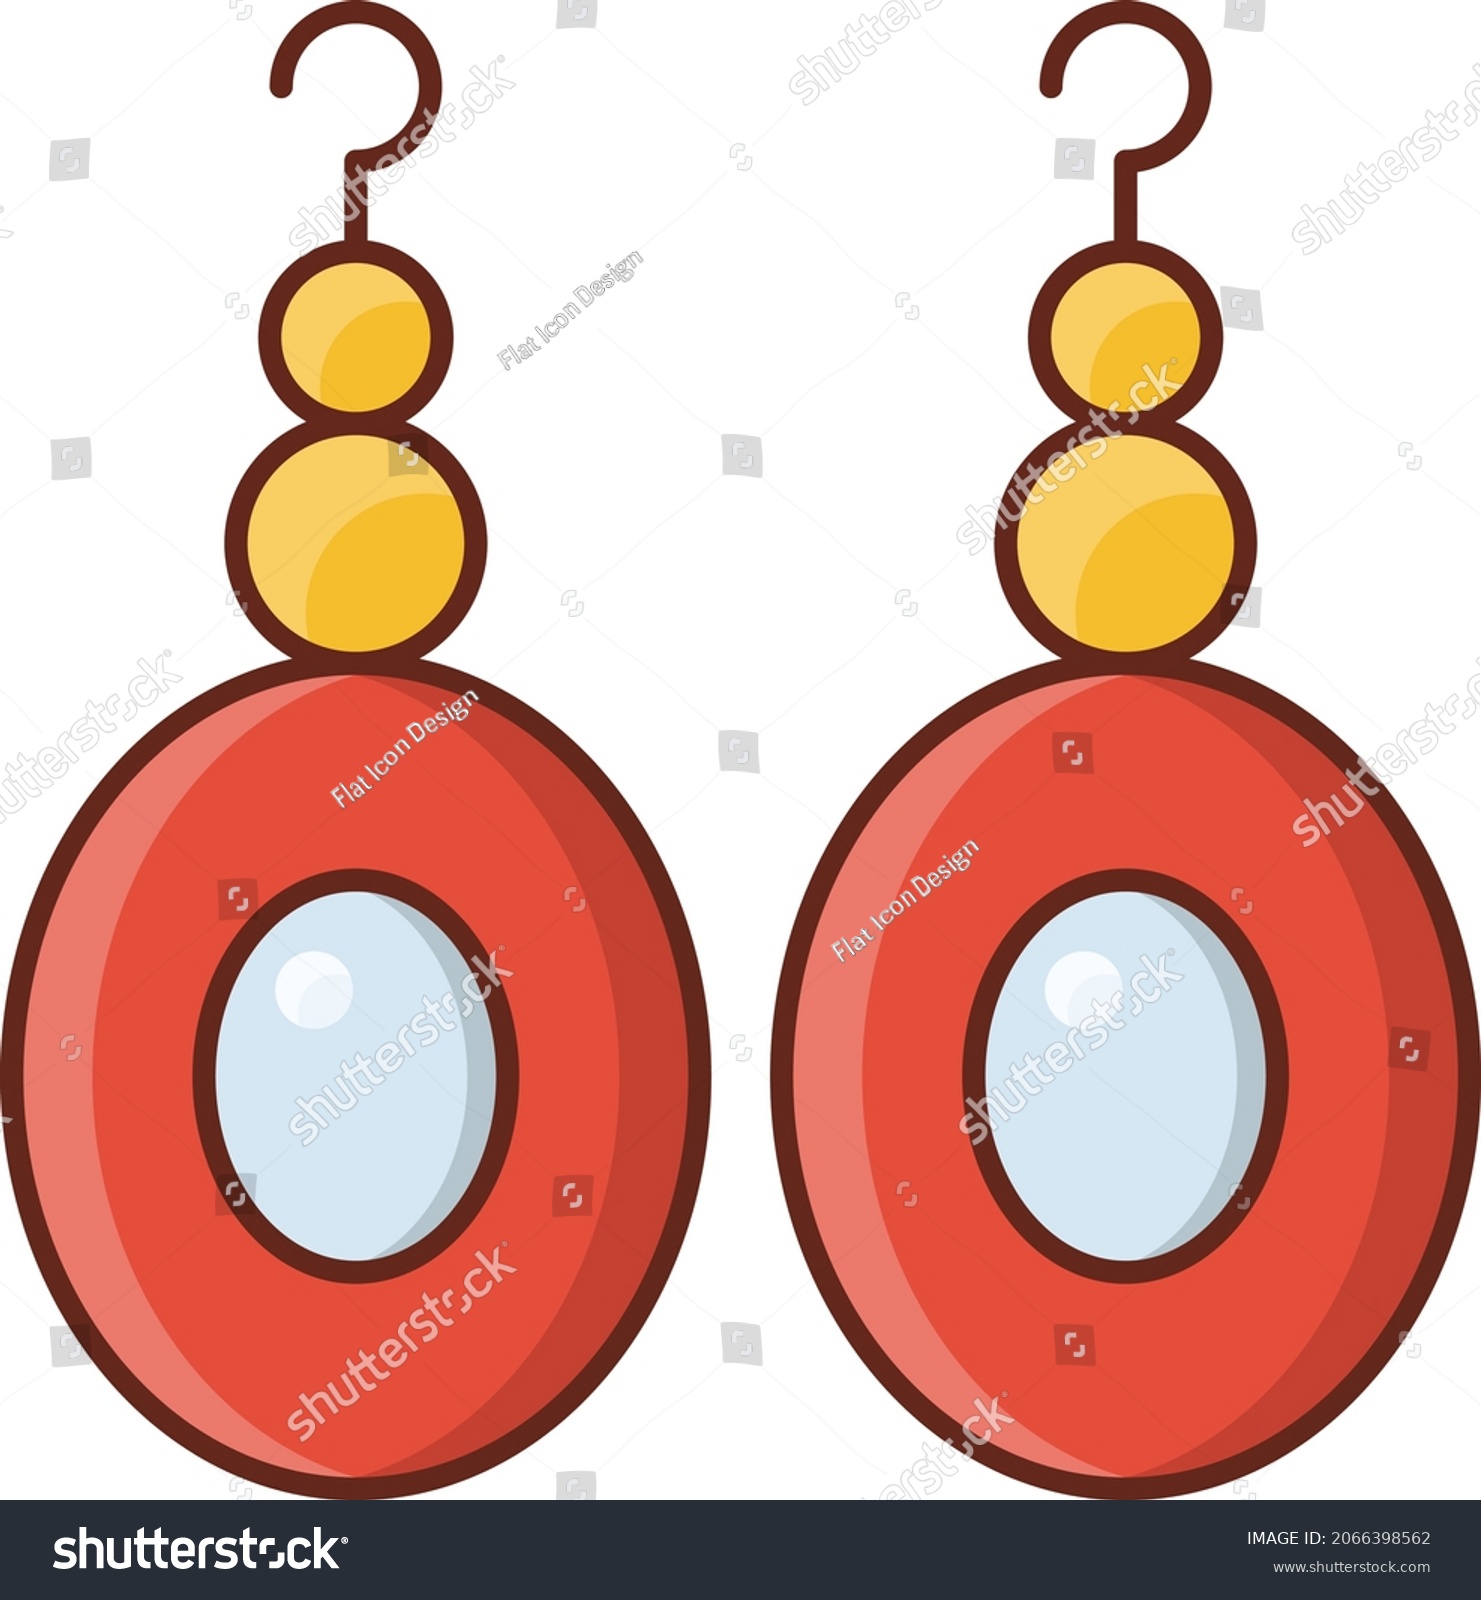 Necklace Vector Illustration On Transparent Background Stock Vector ...